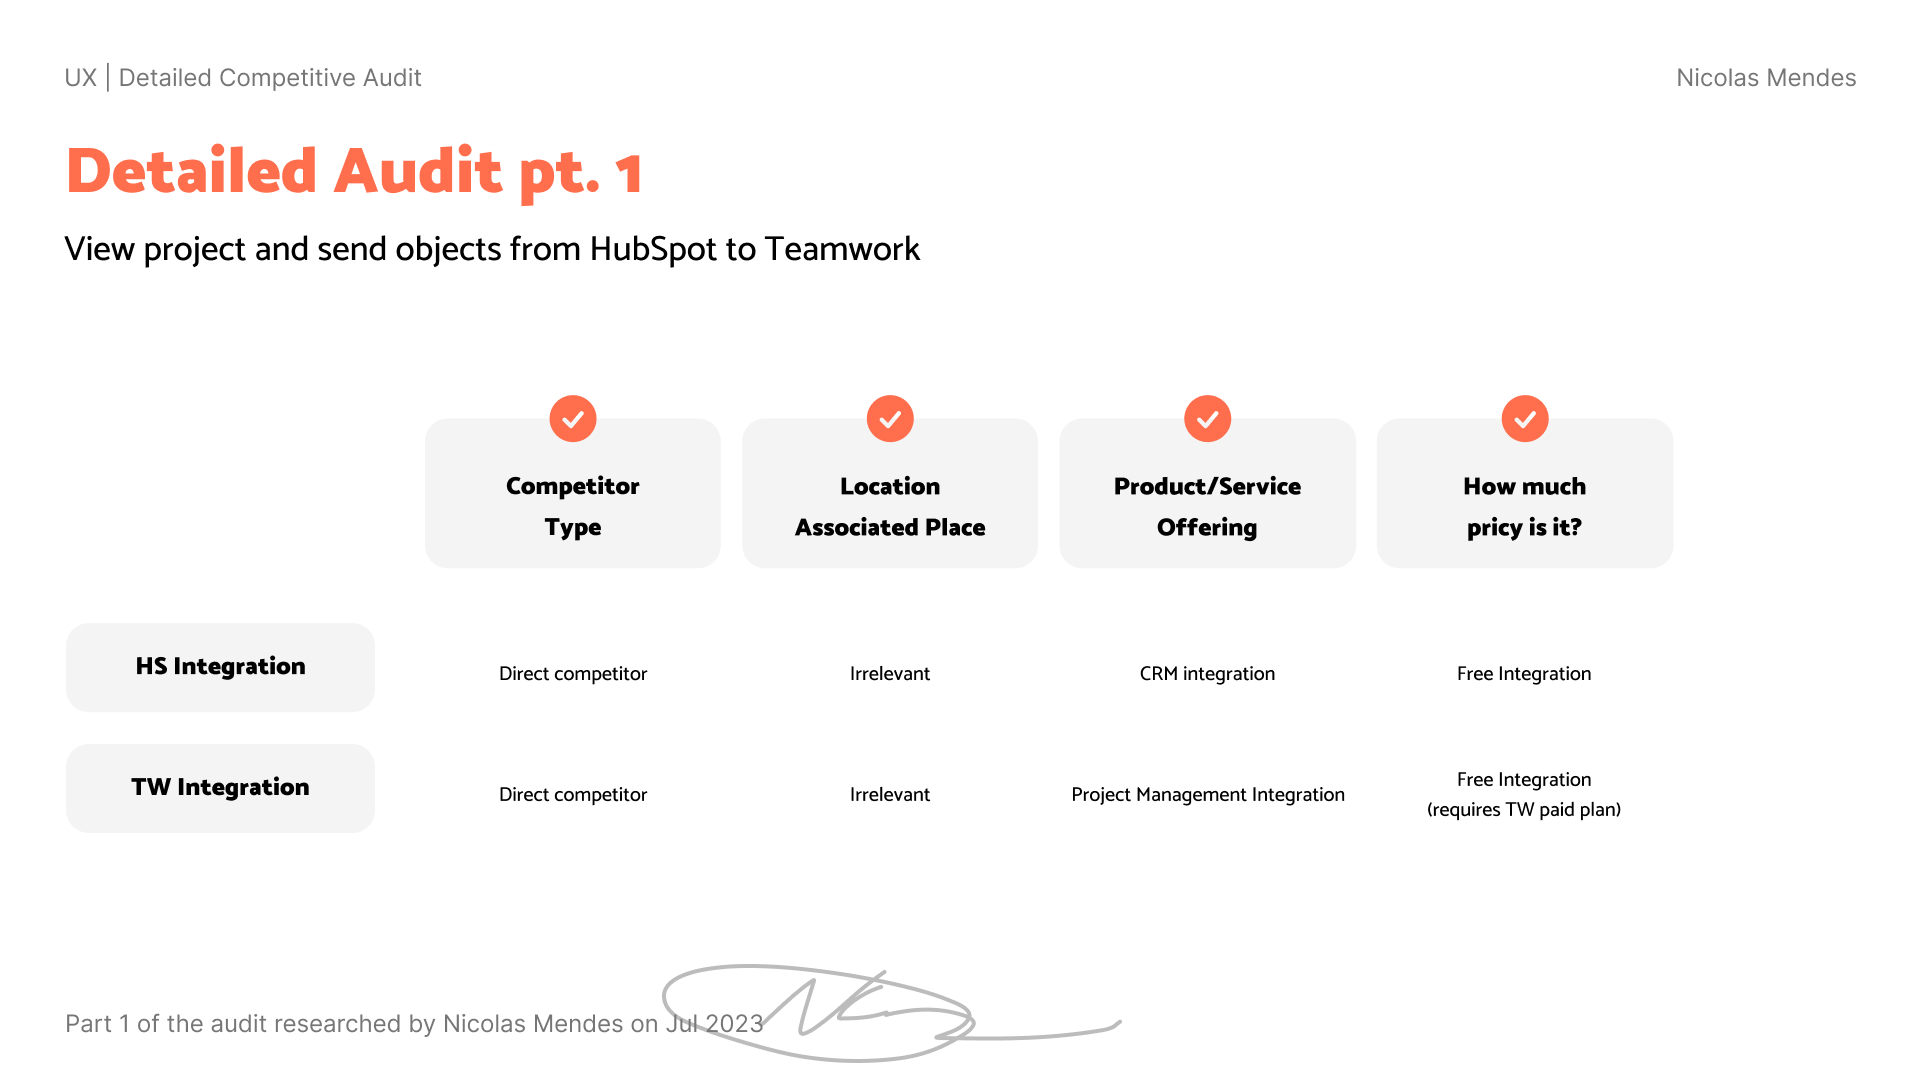 Competitive audit details part 1 of the micro-saas